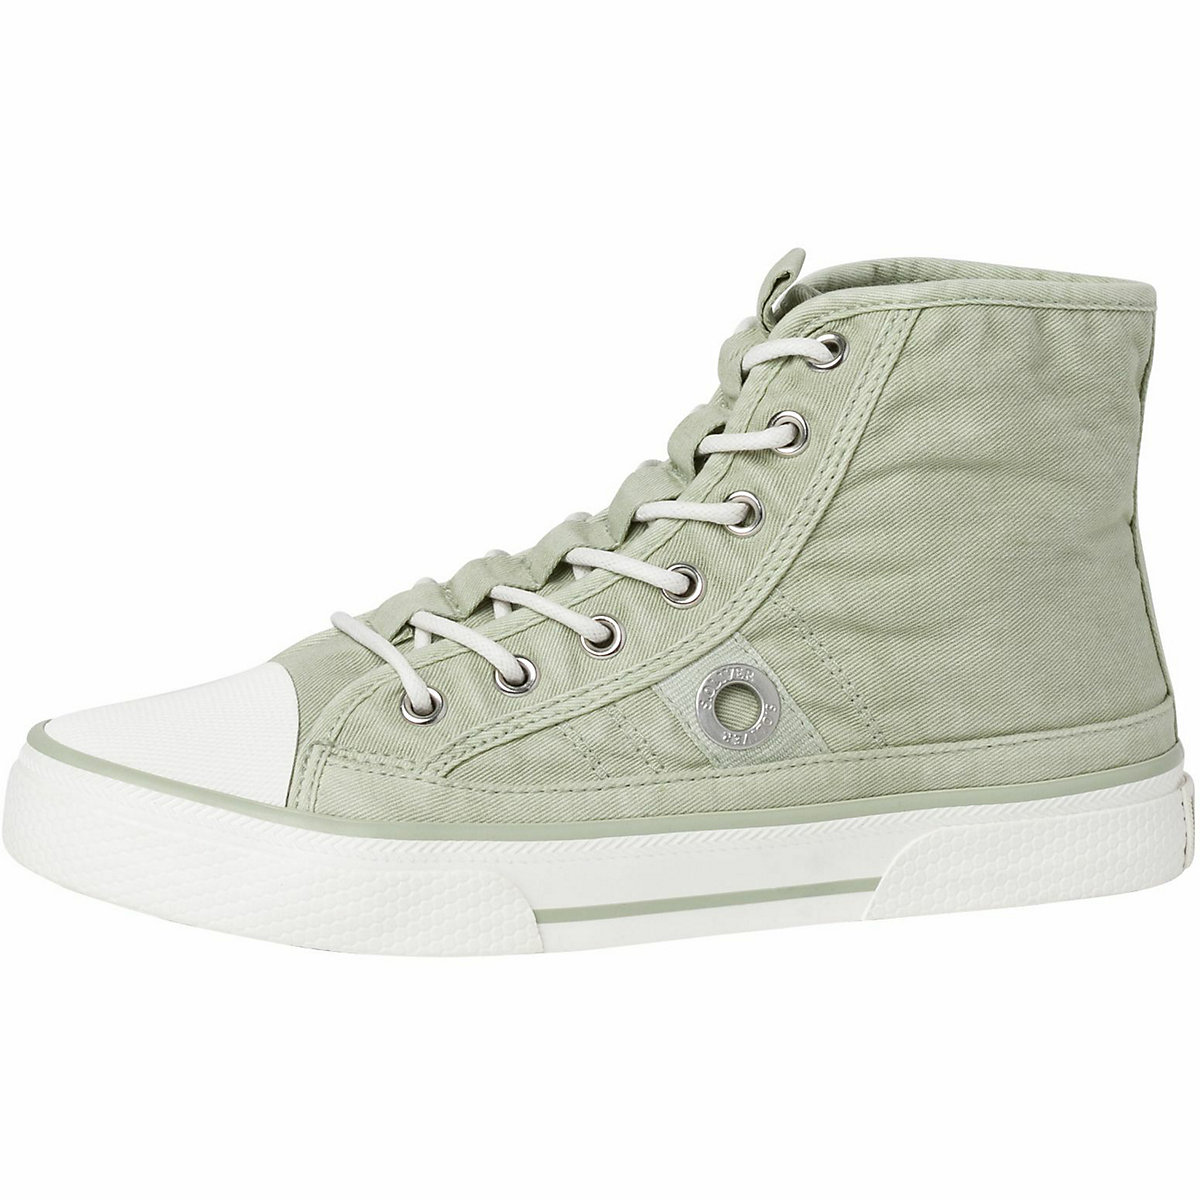 s.Oliver Sneakers High khaki